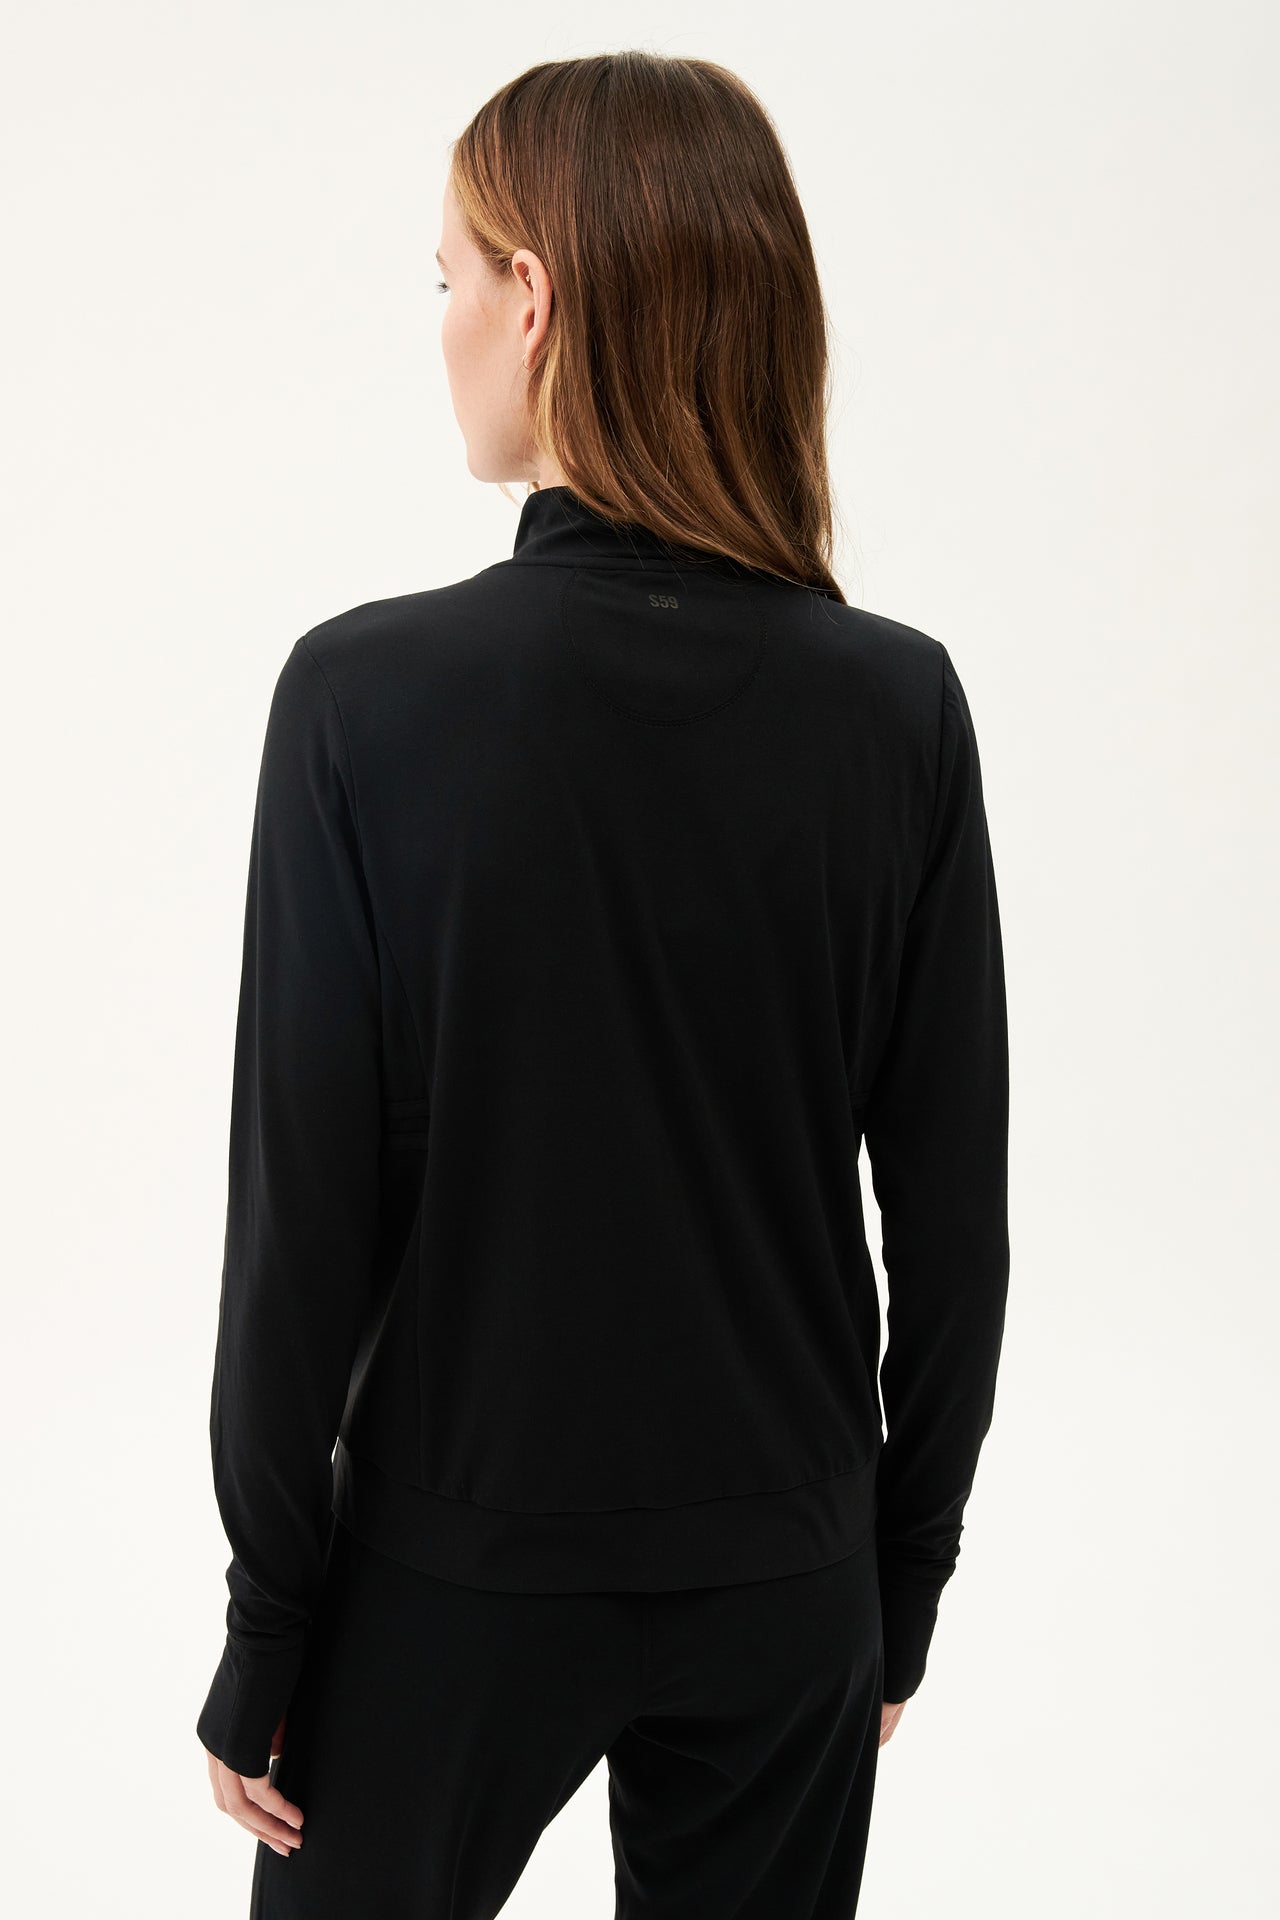 The back view of a woman wearing a SPLITS59 Rain Airweight Jacket in Black, designed for hot yoga.